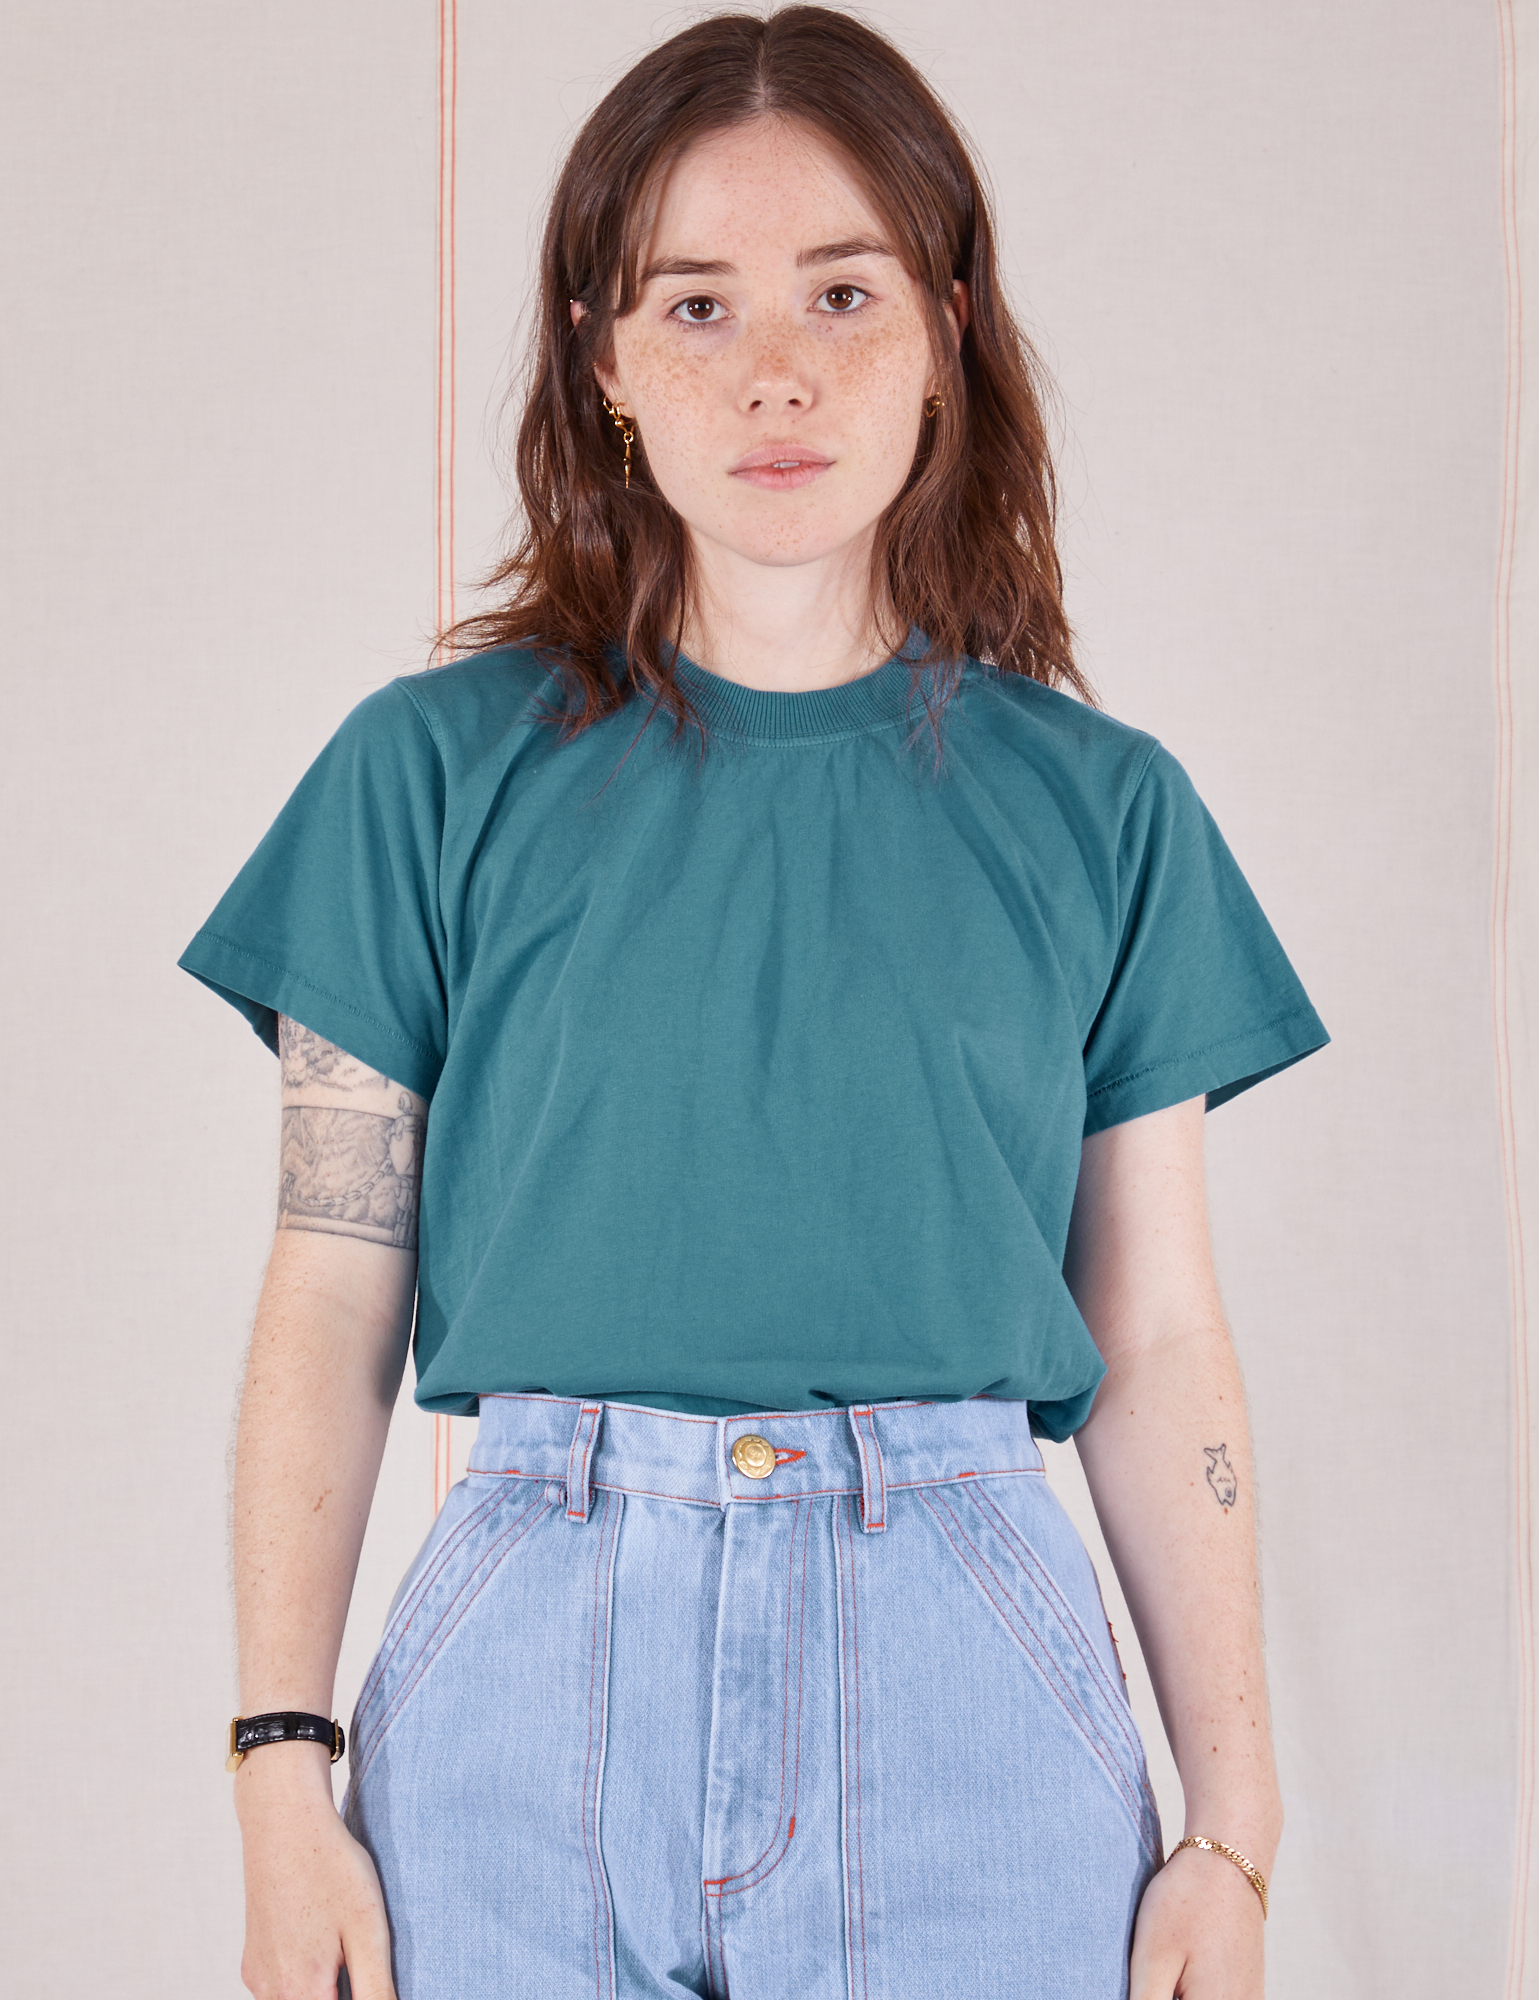 Hana is 5'3" and wearing P Organic Vintage Tee in Marine Blue tucked into light wash Carpenter Jeans